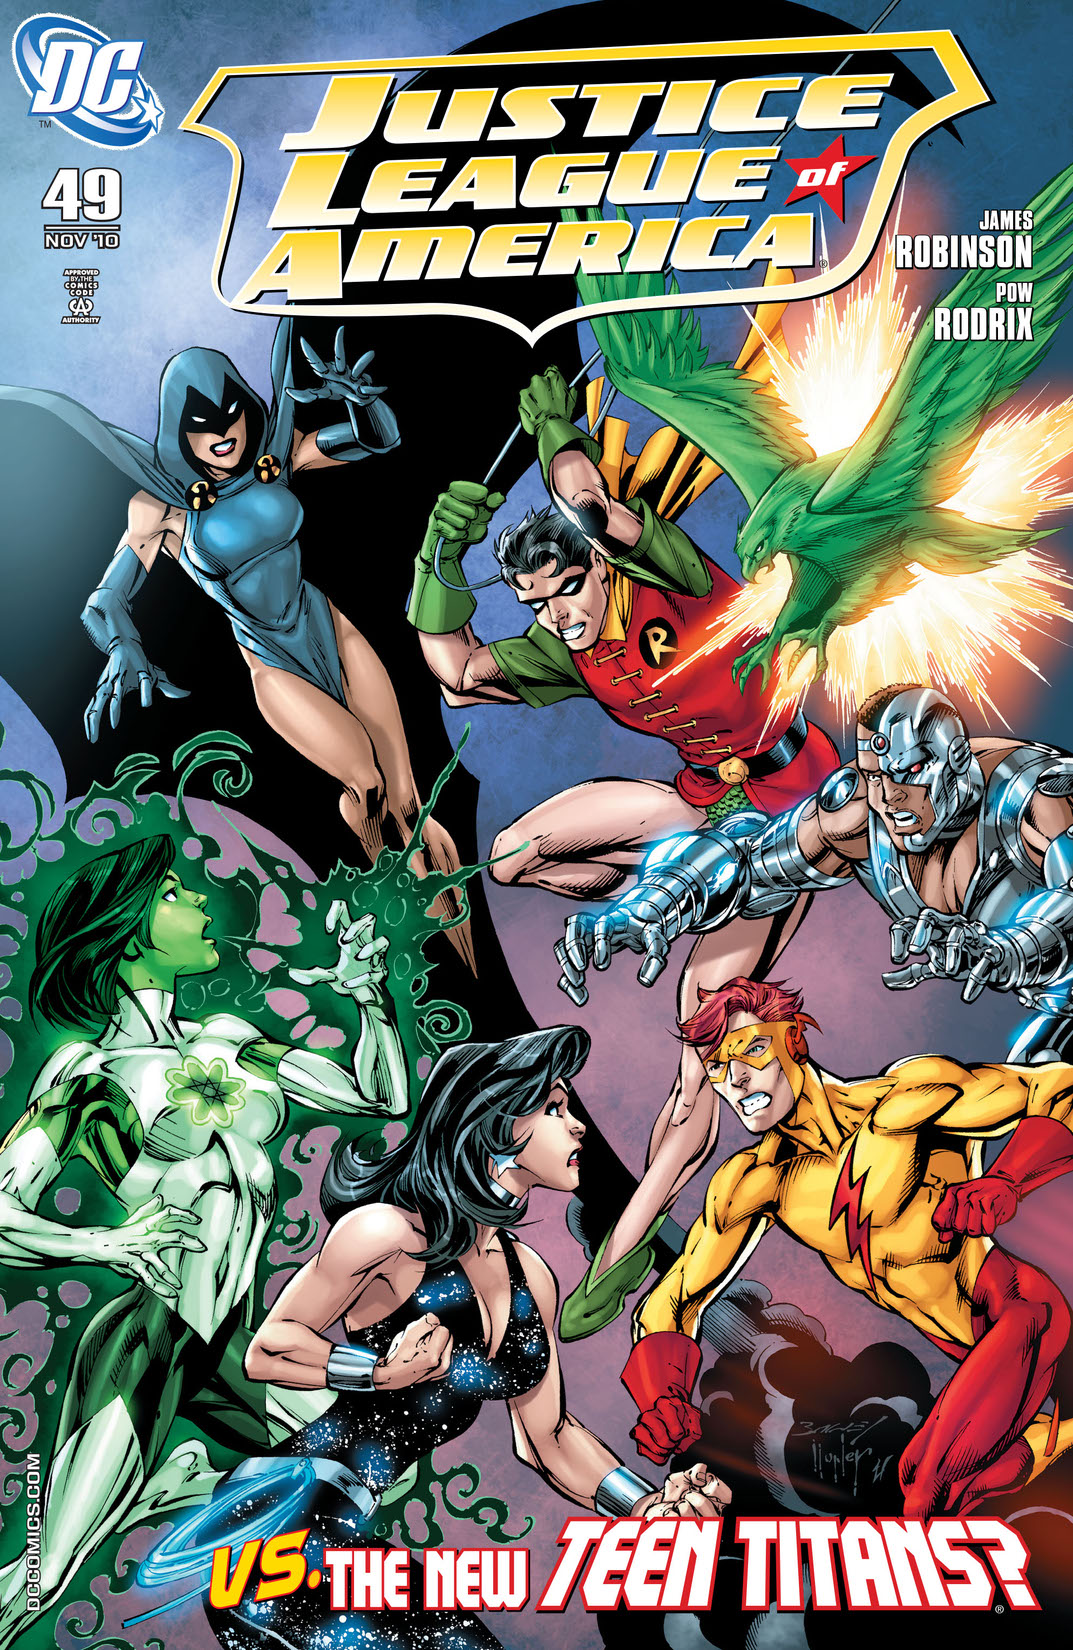 Justice League of America (2006-) #49 preview images